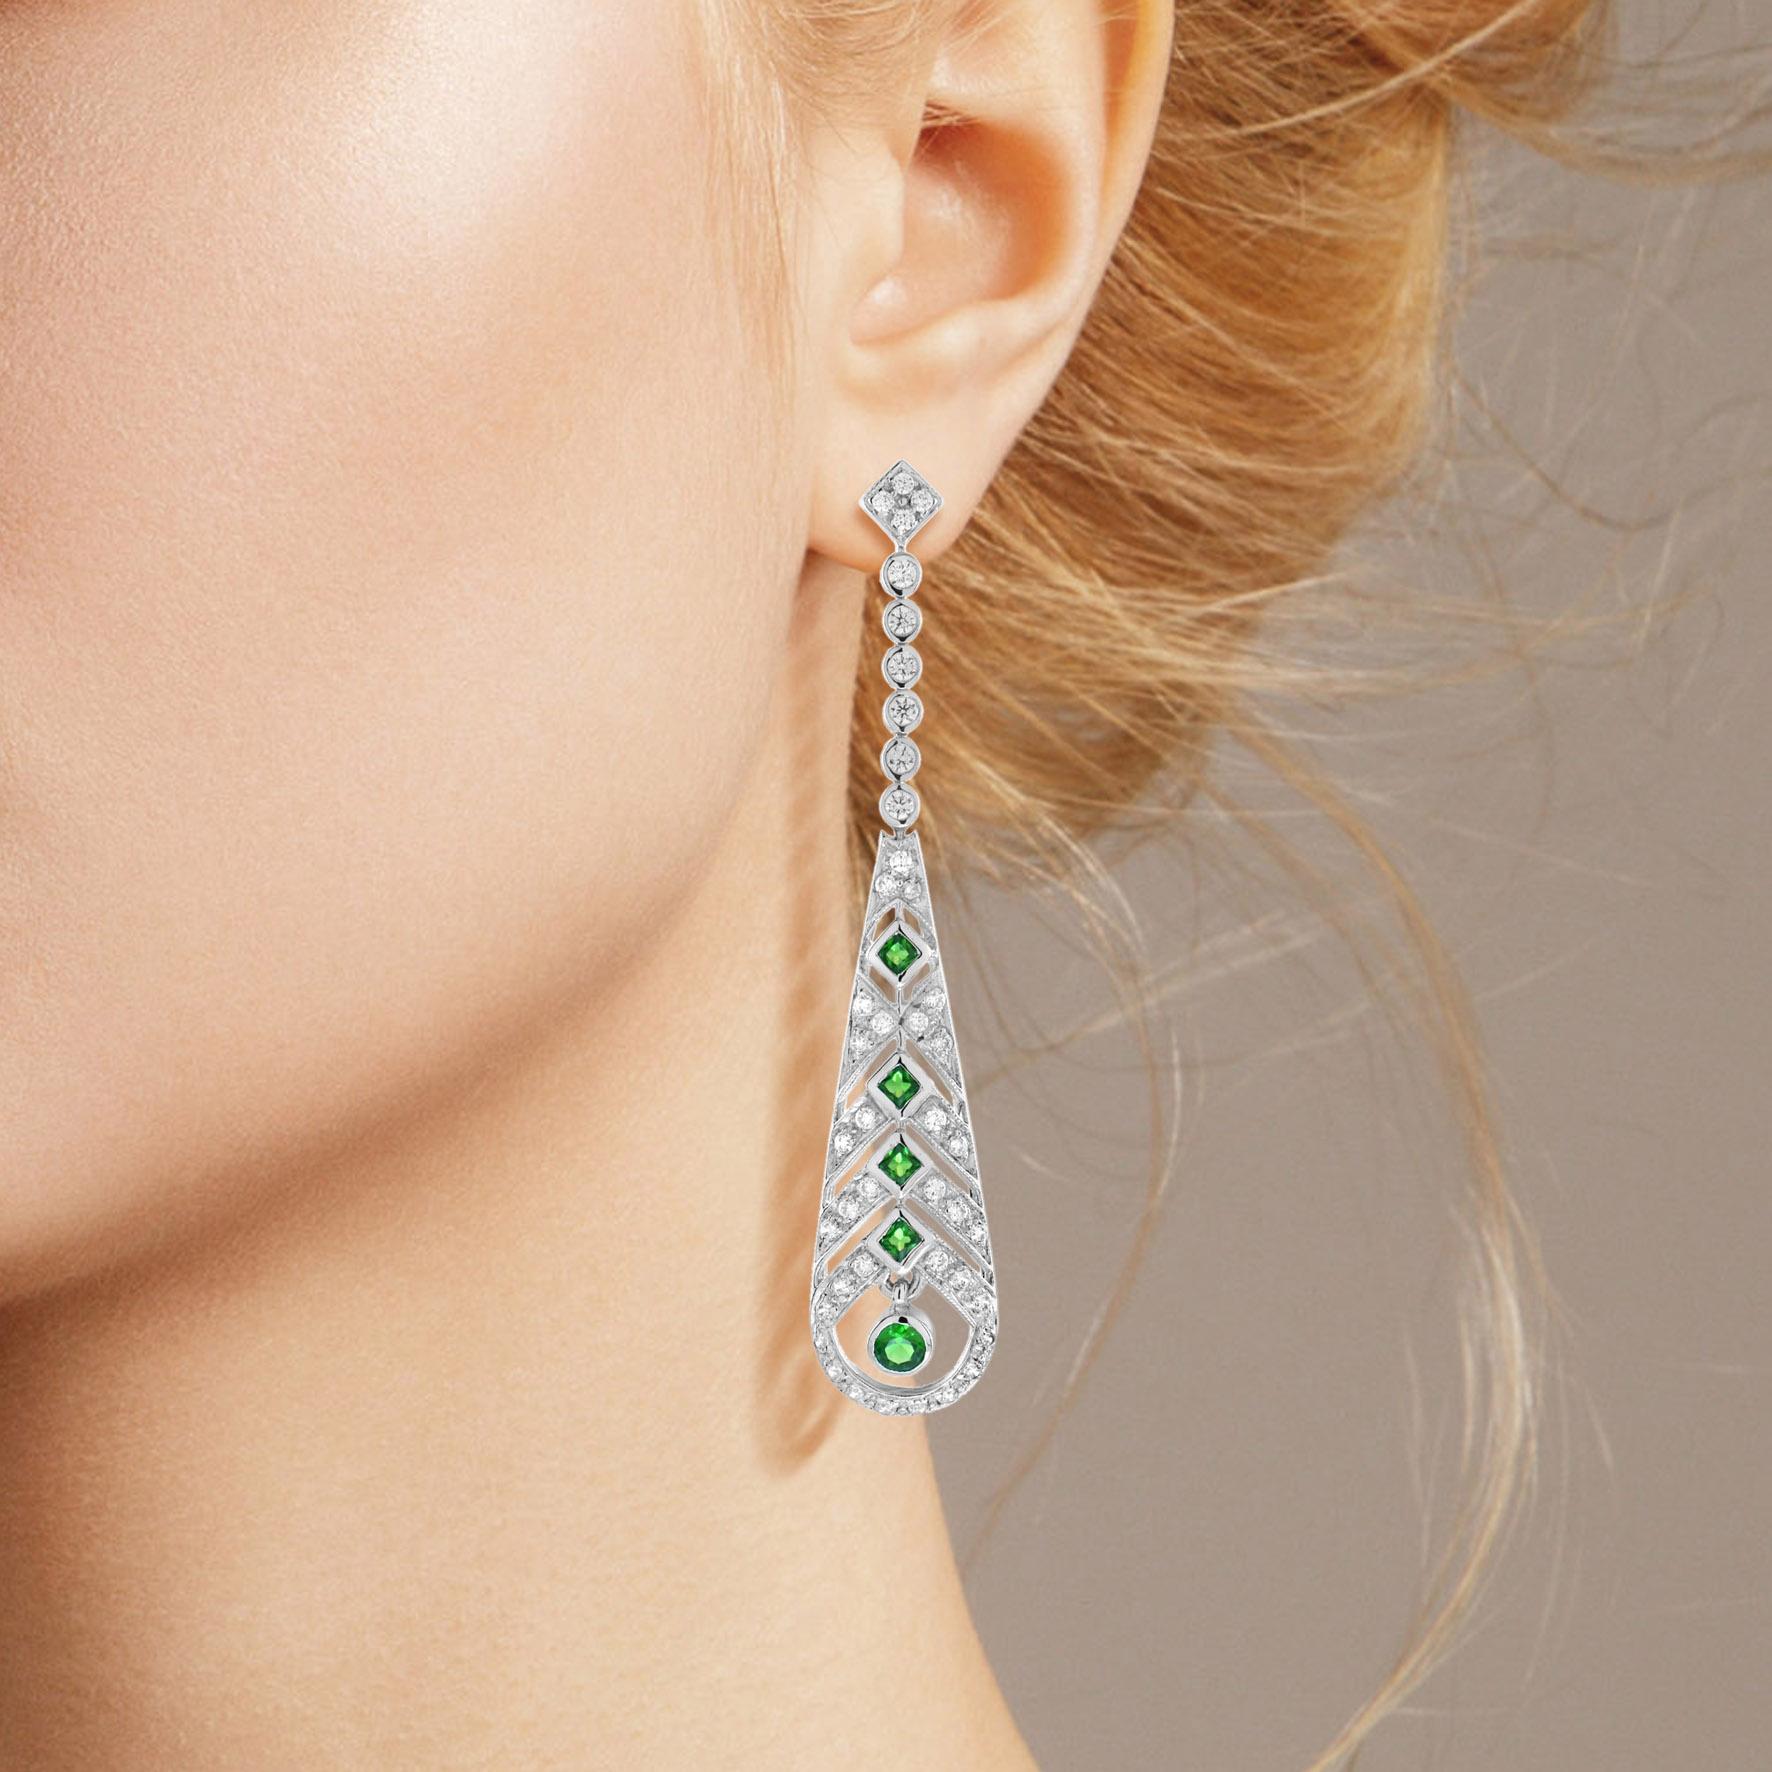 A fabulous pair of emerald and diamond Art Deco design earrings. Typically Deco, these wonderful earrings have round and square emeralds with diamonds. They are beautifully elegant when worn as they have wonderful movement.

Earrings